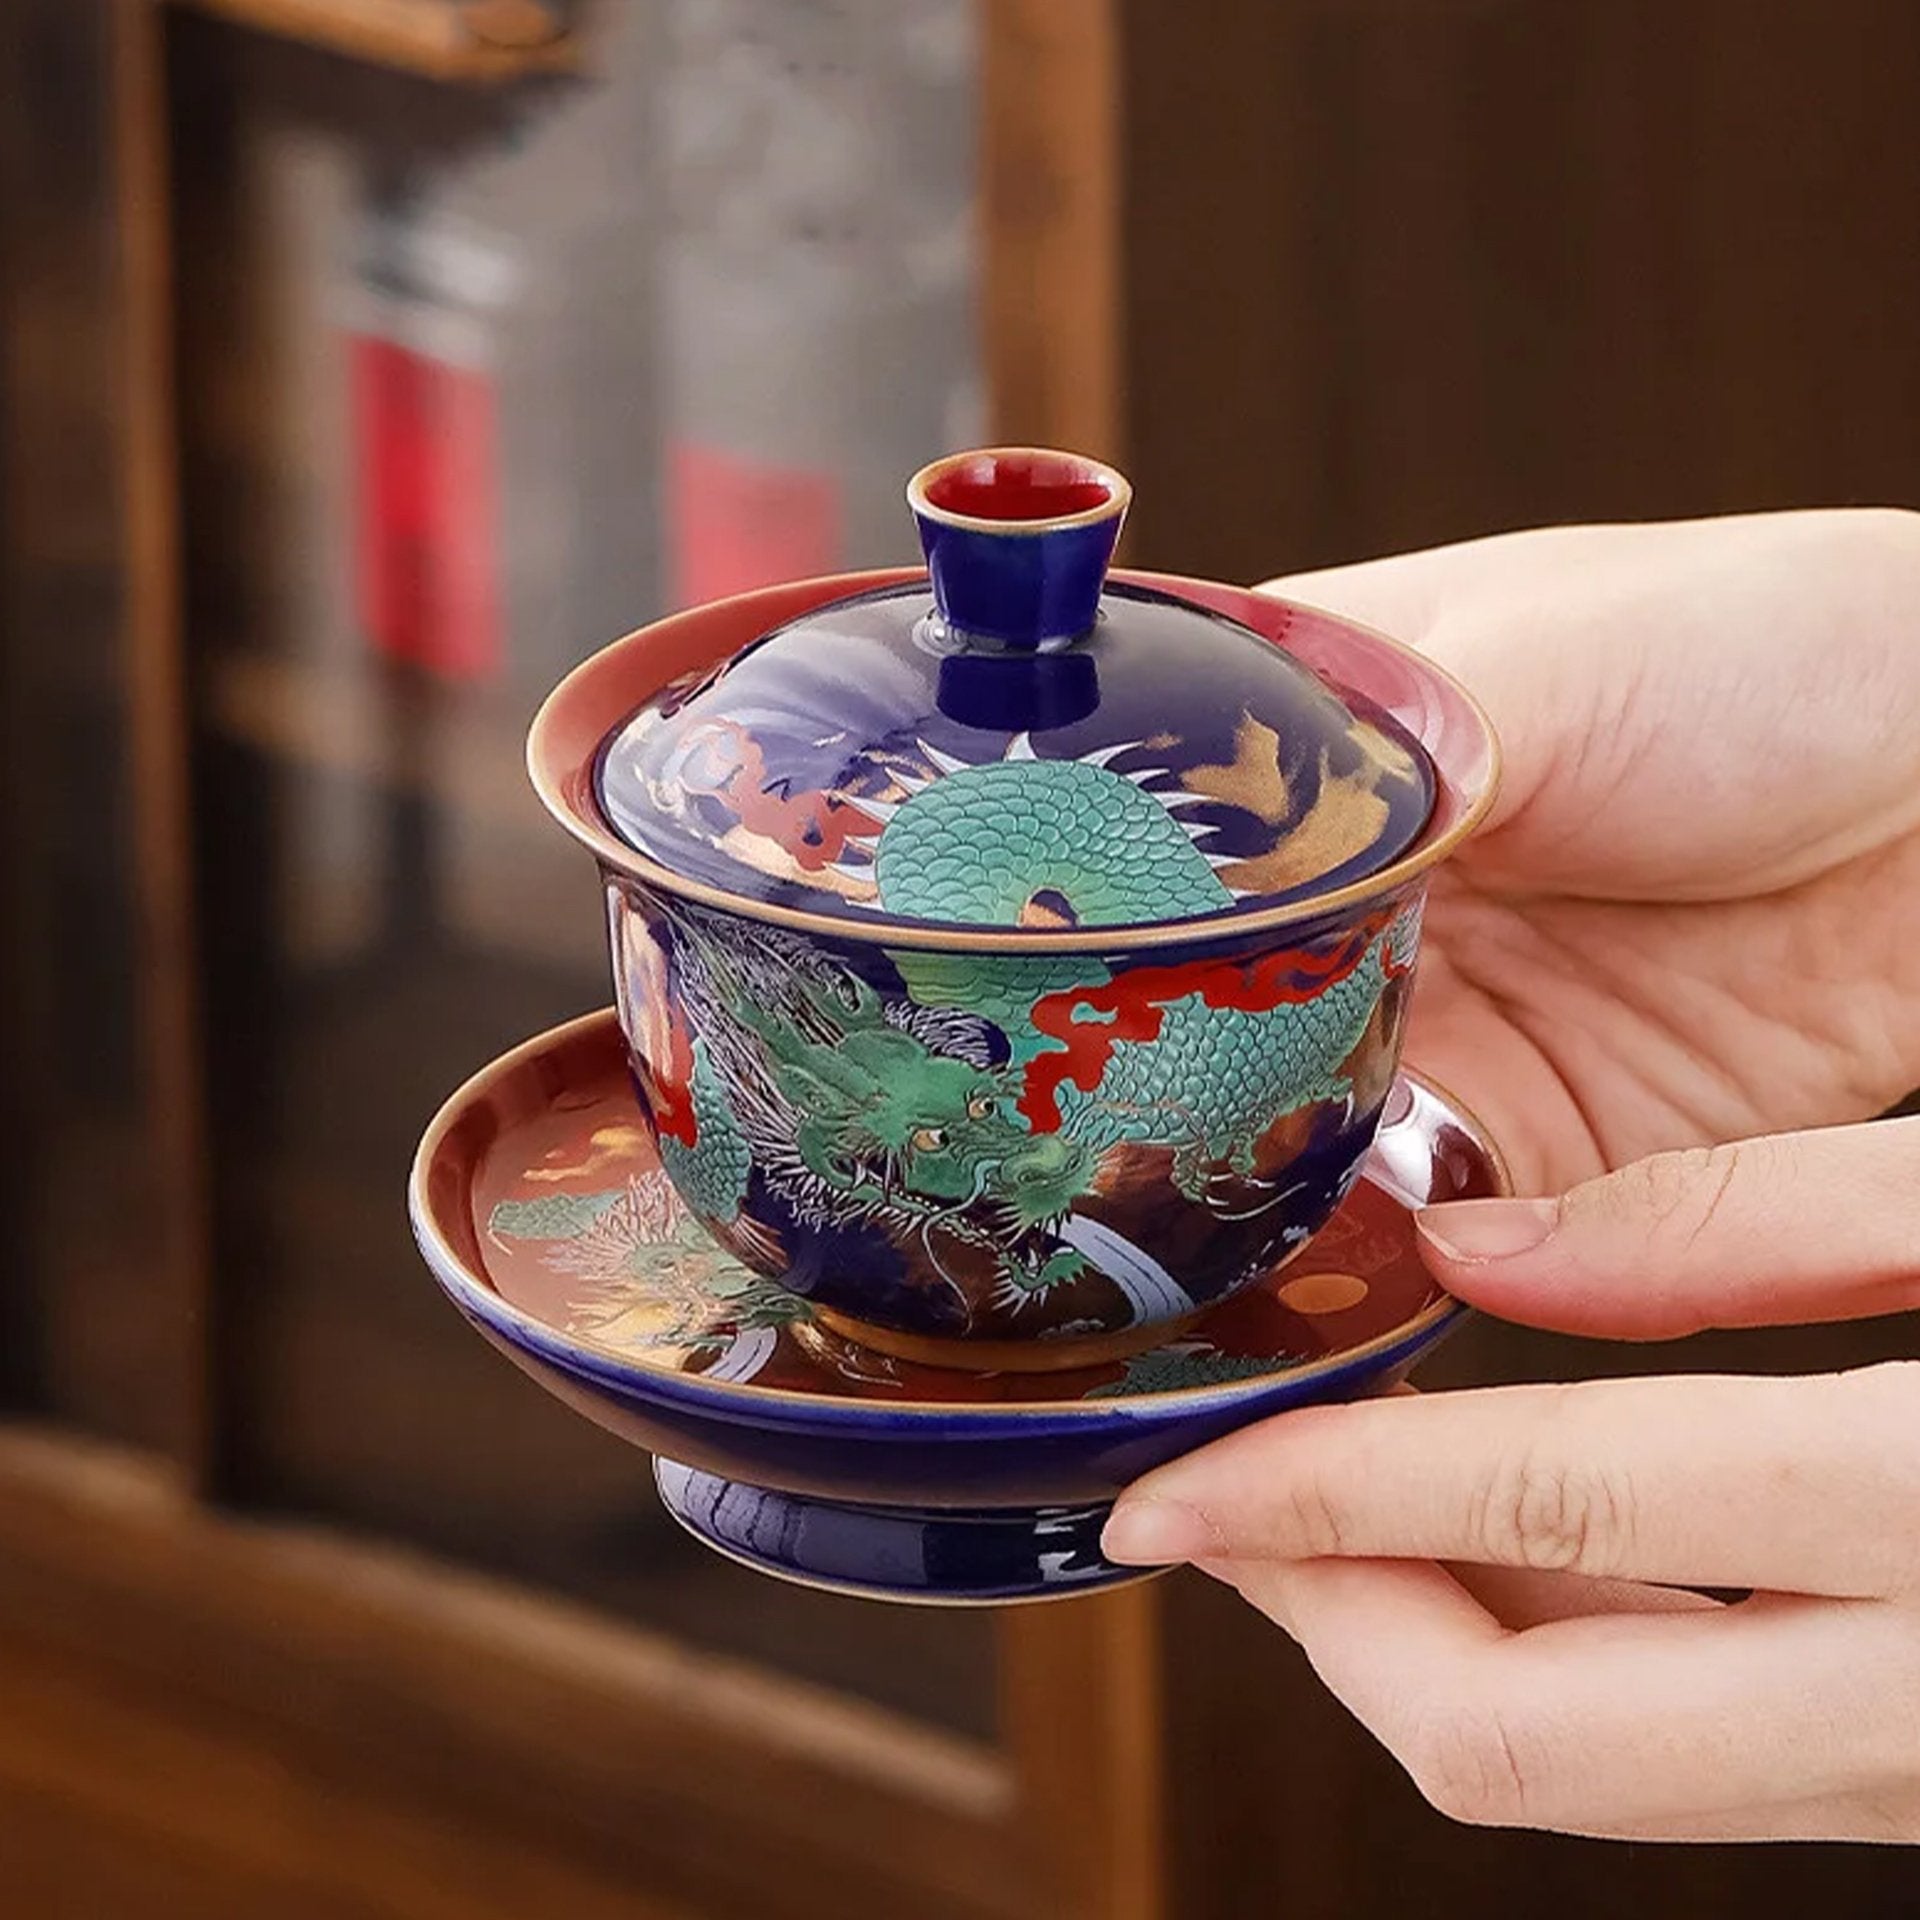 Holding a dragon-patterned gaiwan over a matching saucer.